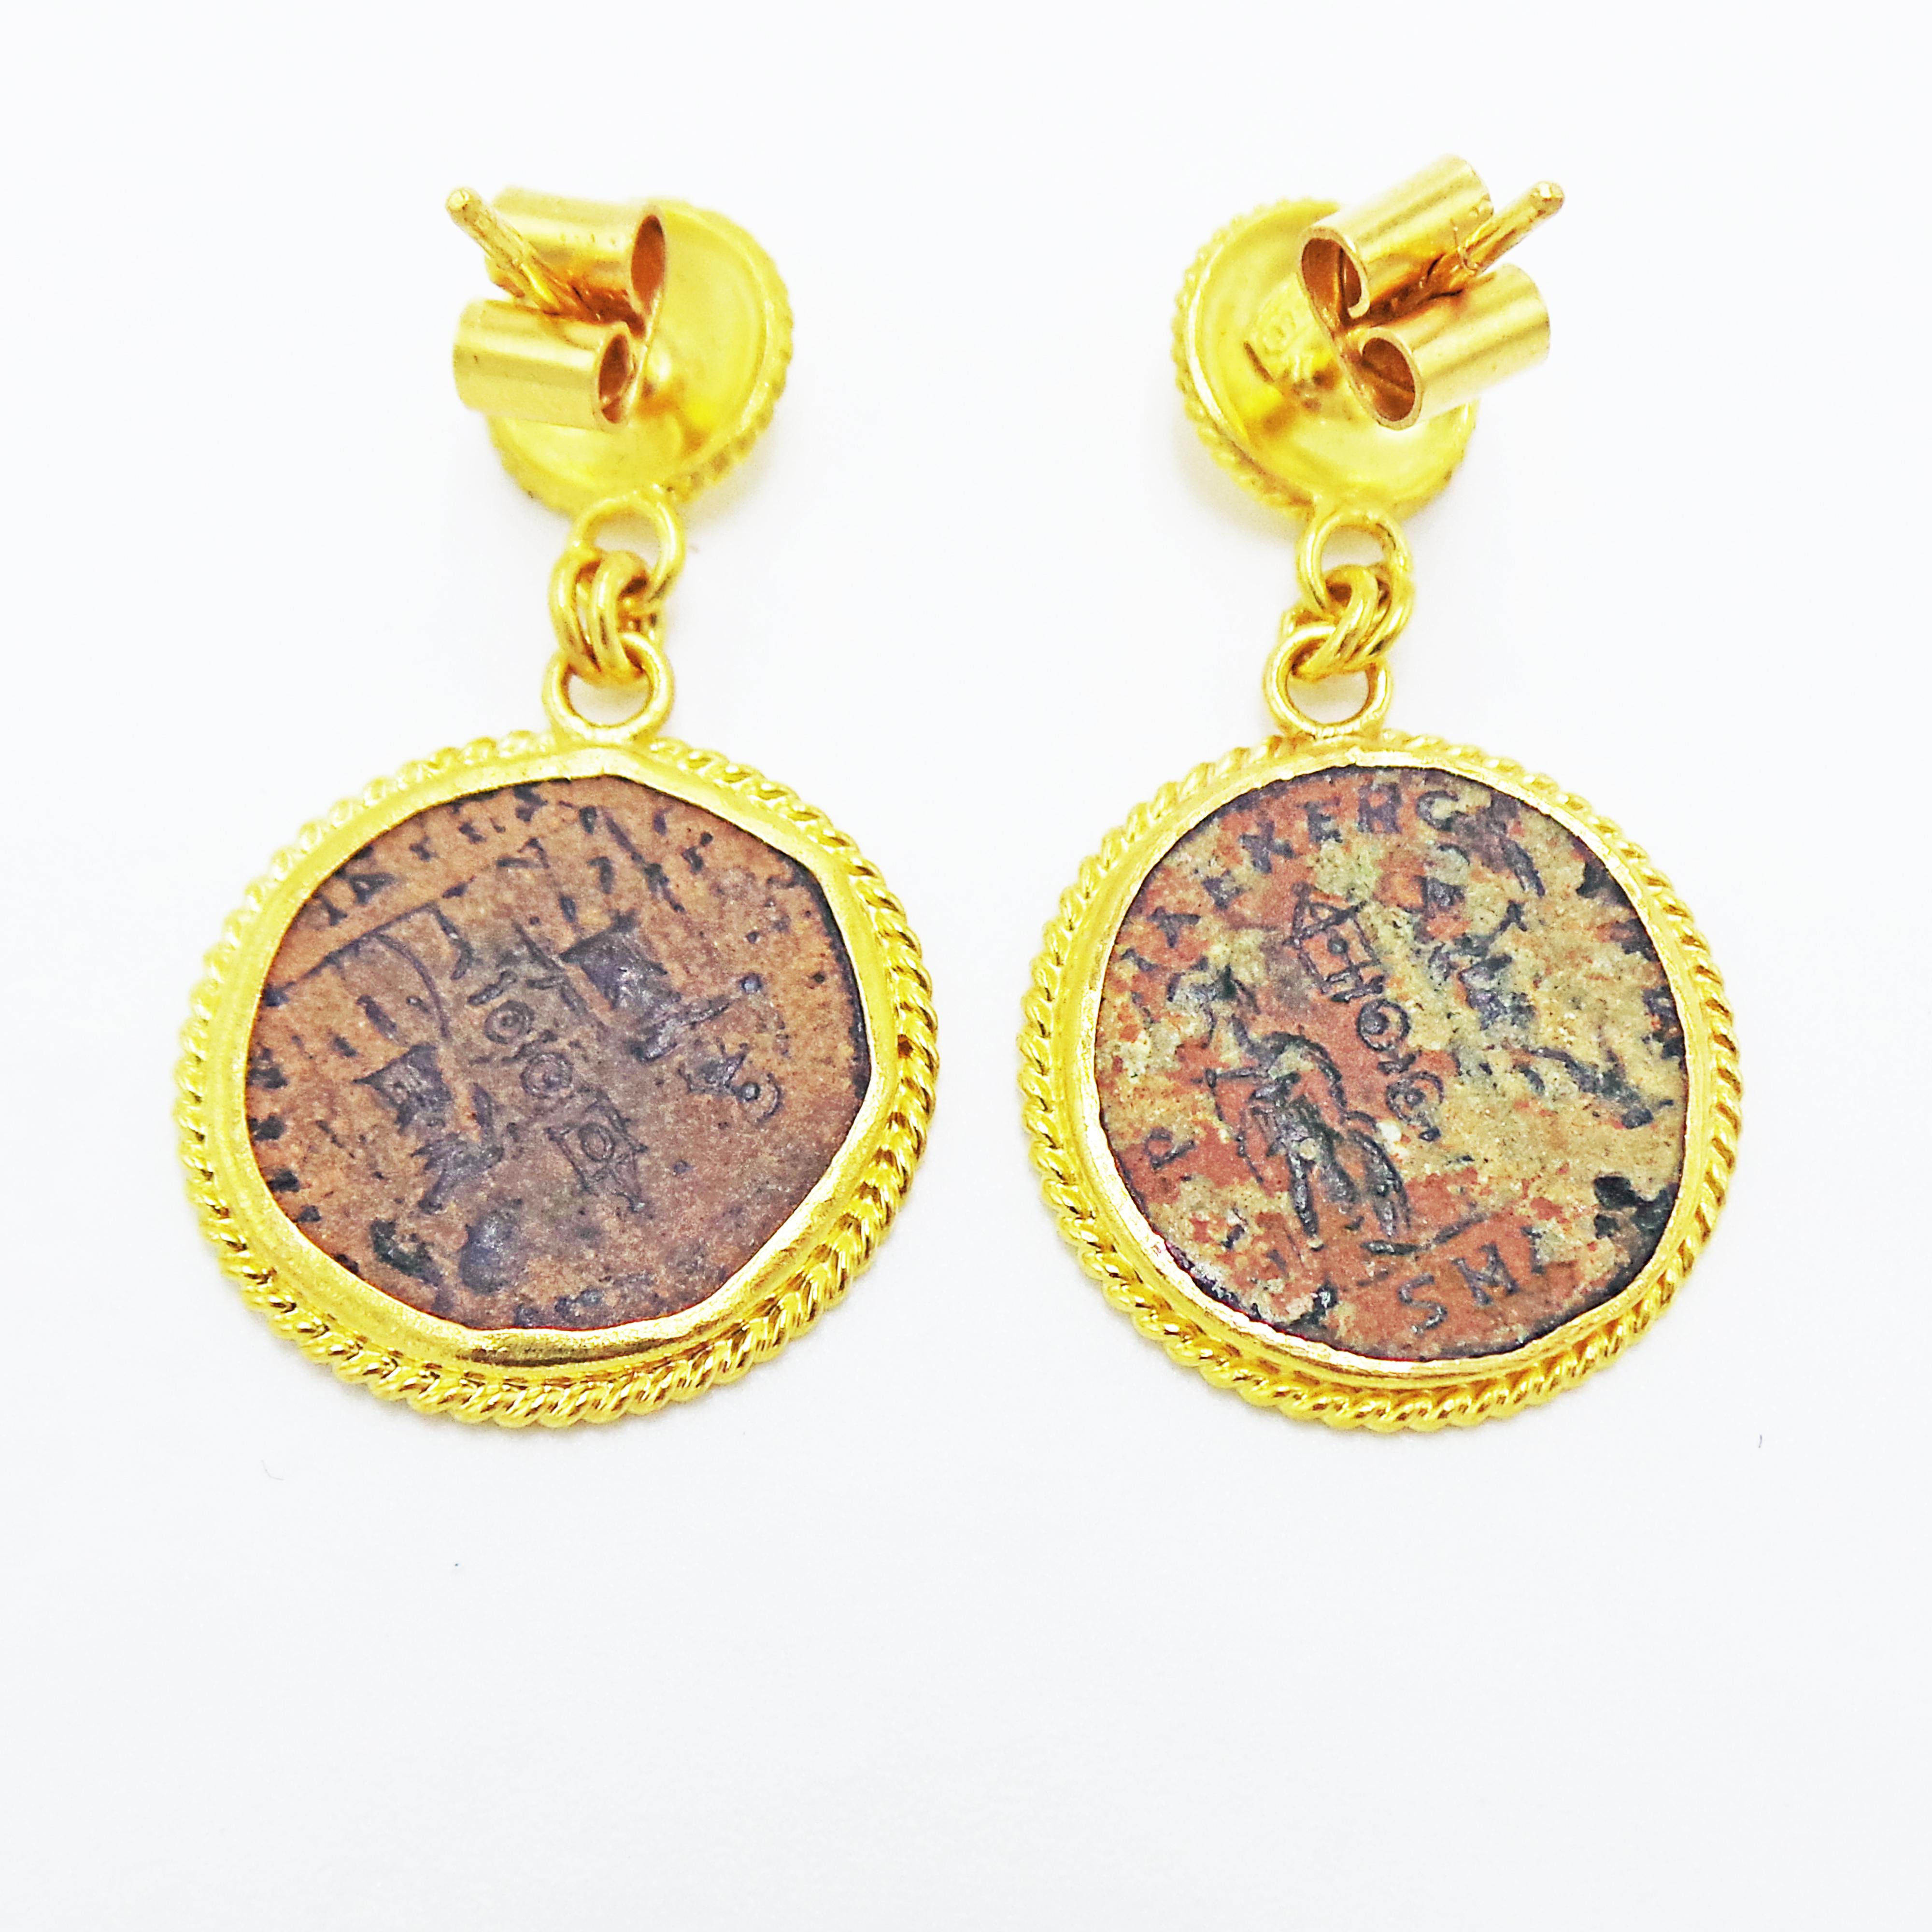 Authentic ancient Roman bronze coins (Constantius II, 337-361 AD) set in rope detailed 22k yellow gold stud drop earrings.